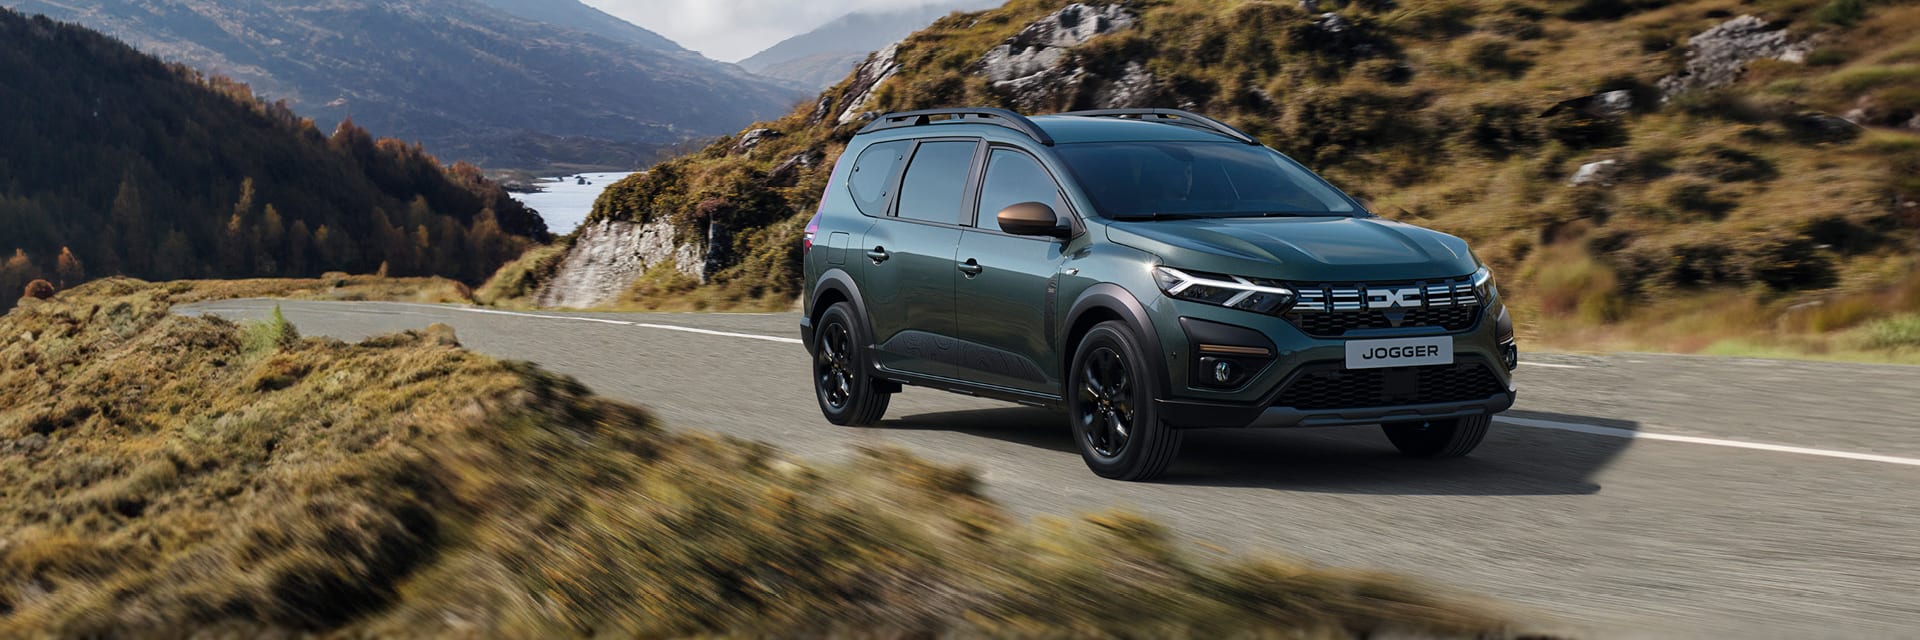 New Dacia Jogger Offers 